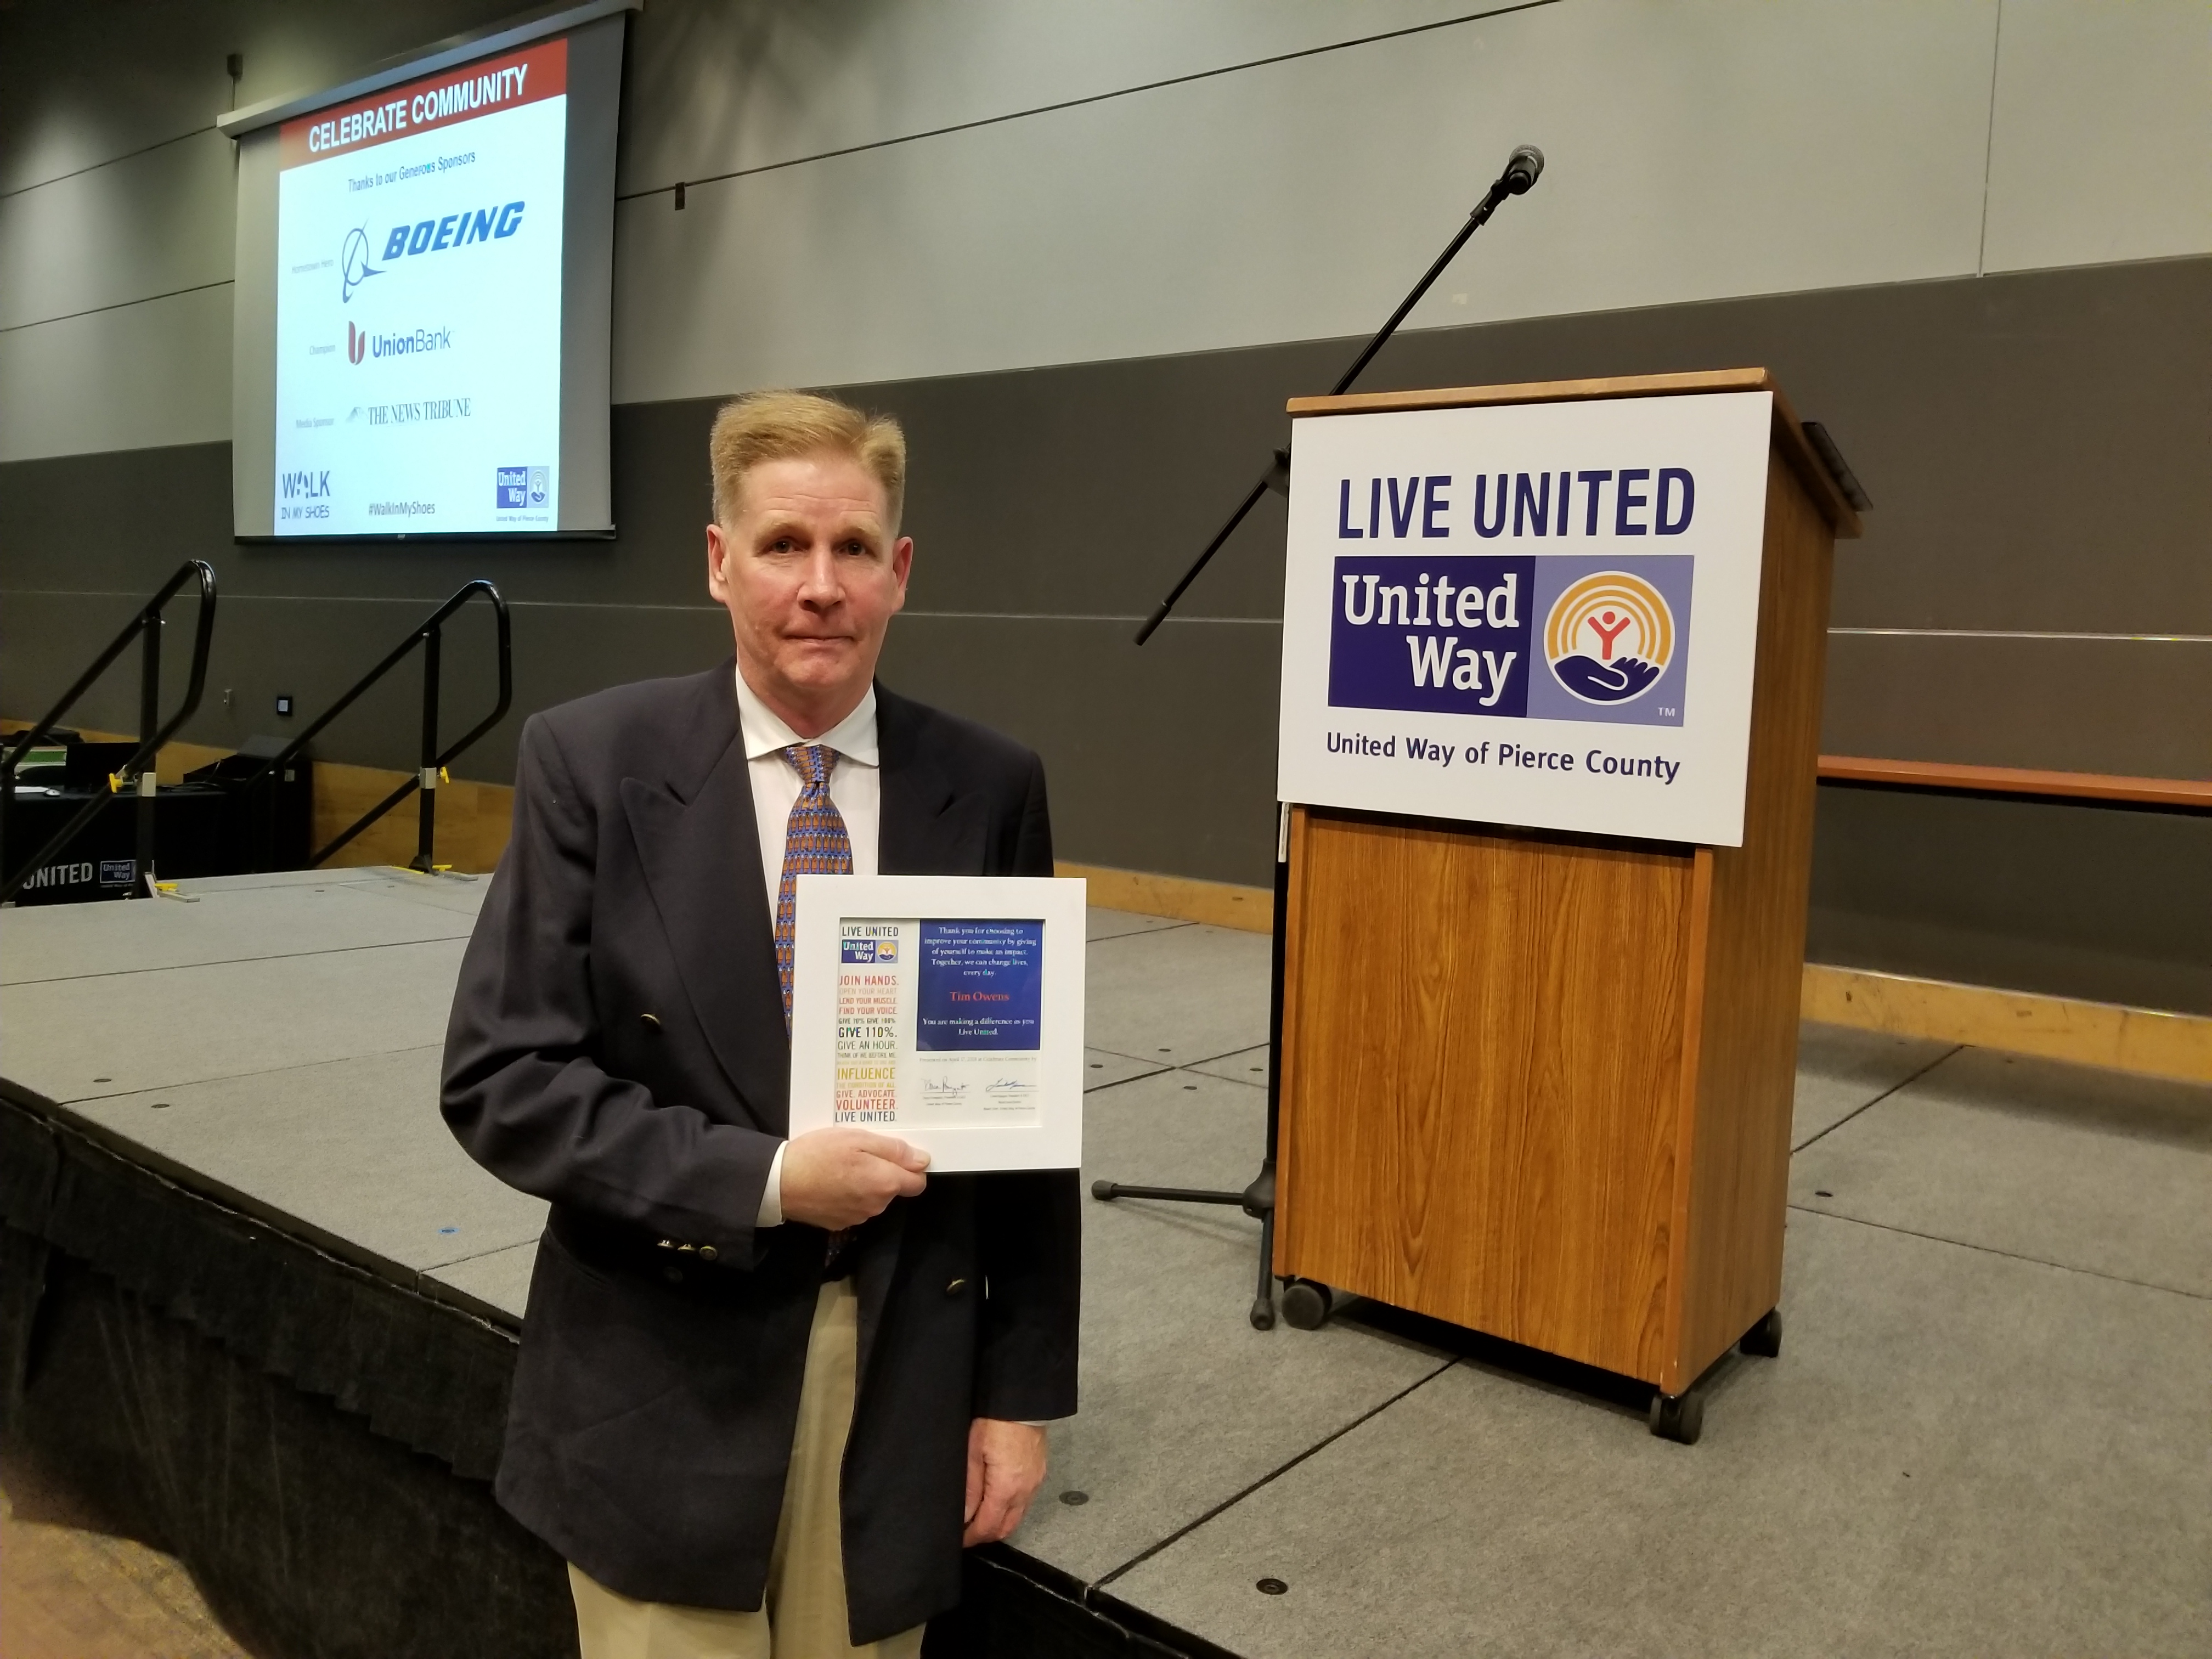 Pierce County WDC Chair Tim Owens poses with his LIVE UNITED award on April 17, 2018.